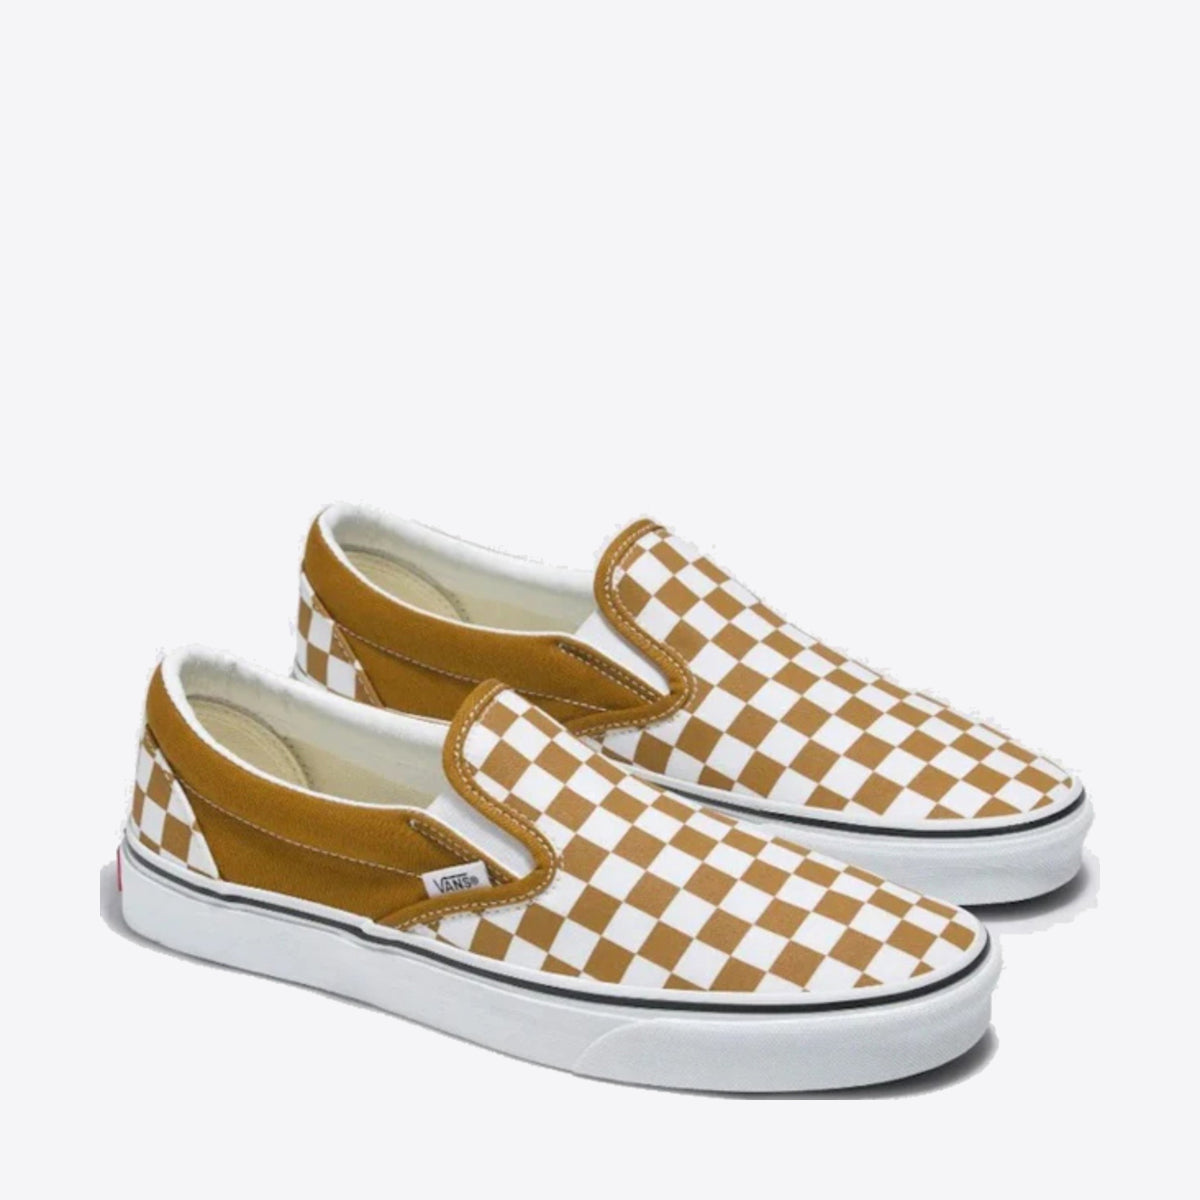 VANS Classic Checkerboard Colour Theory - Unisex Golden Brown - Image 2